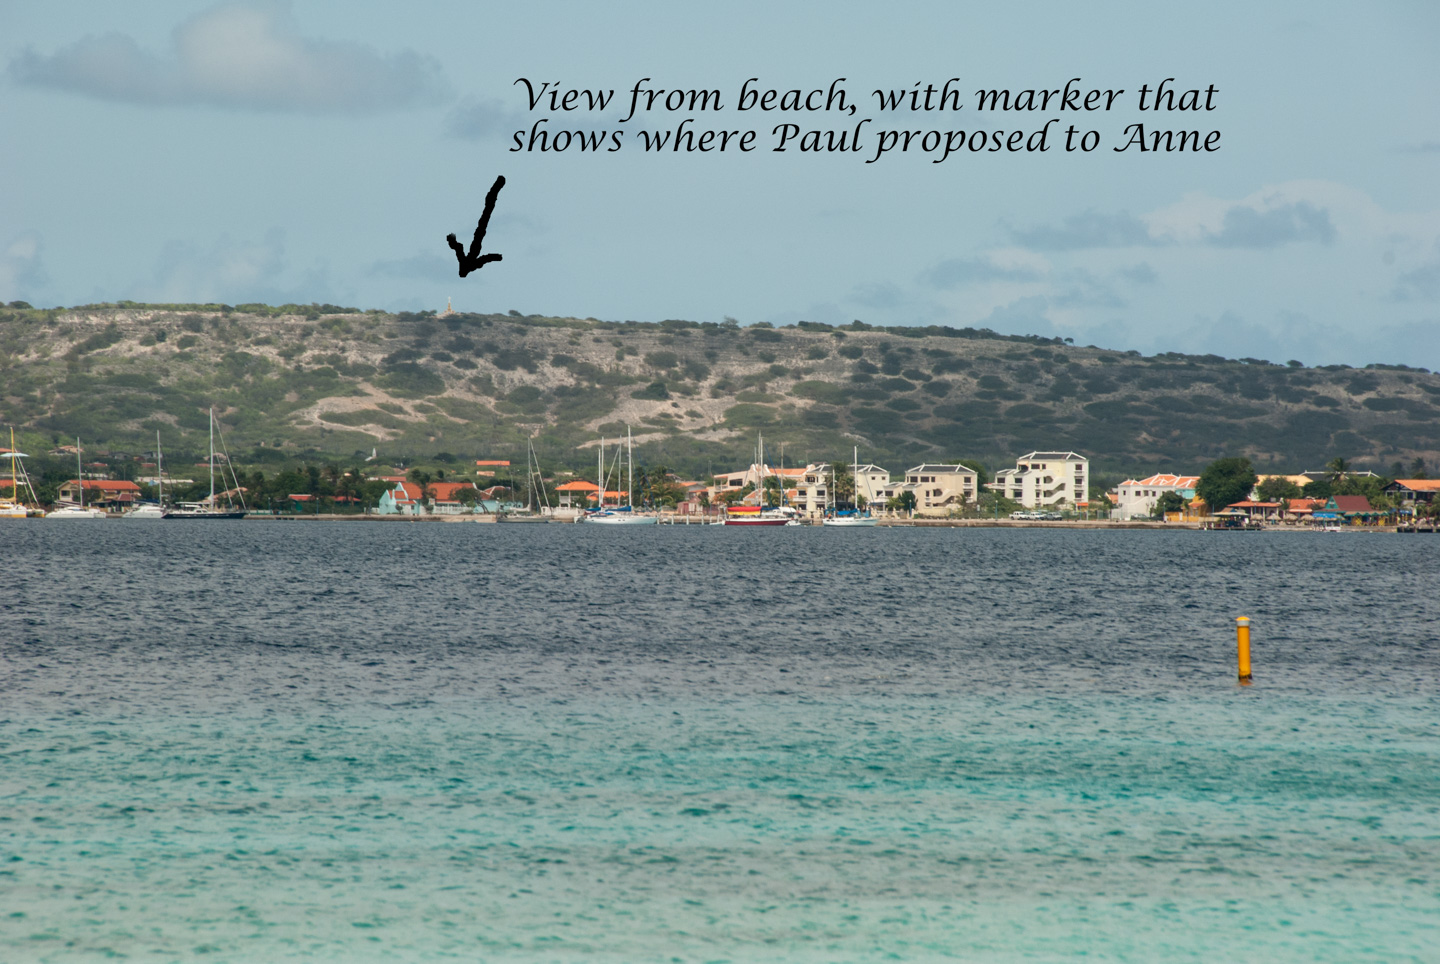 View from Windsock Beach, annotated